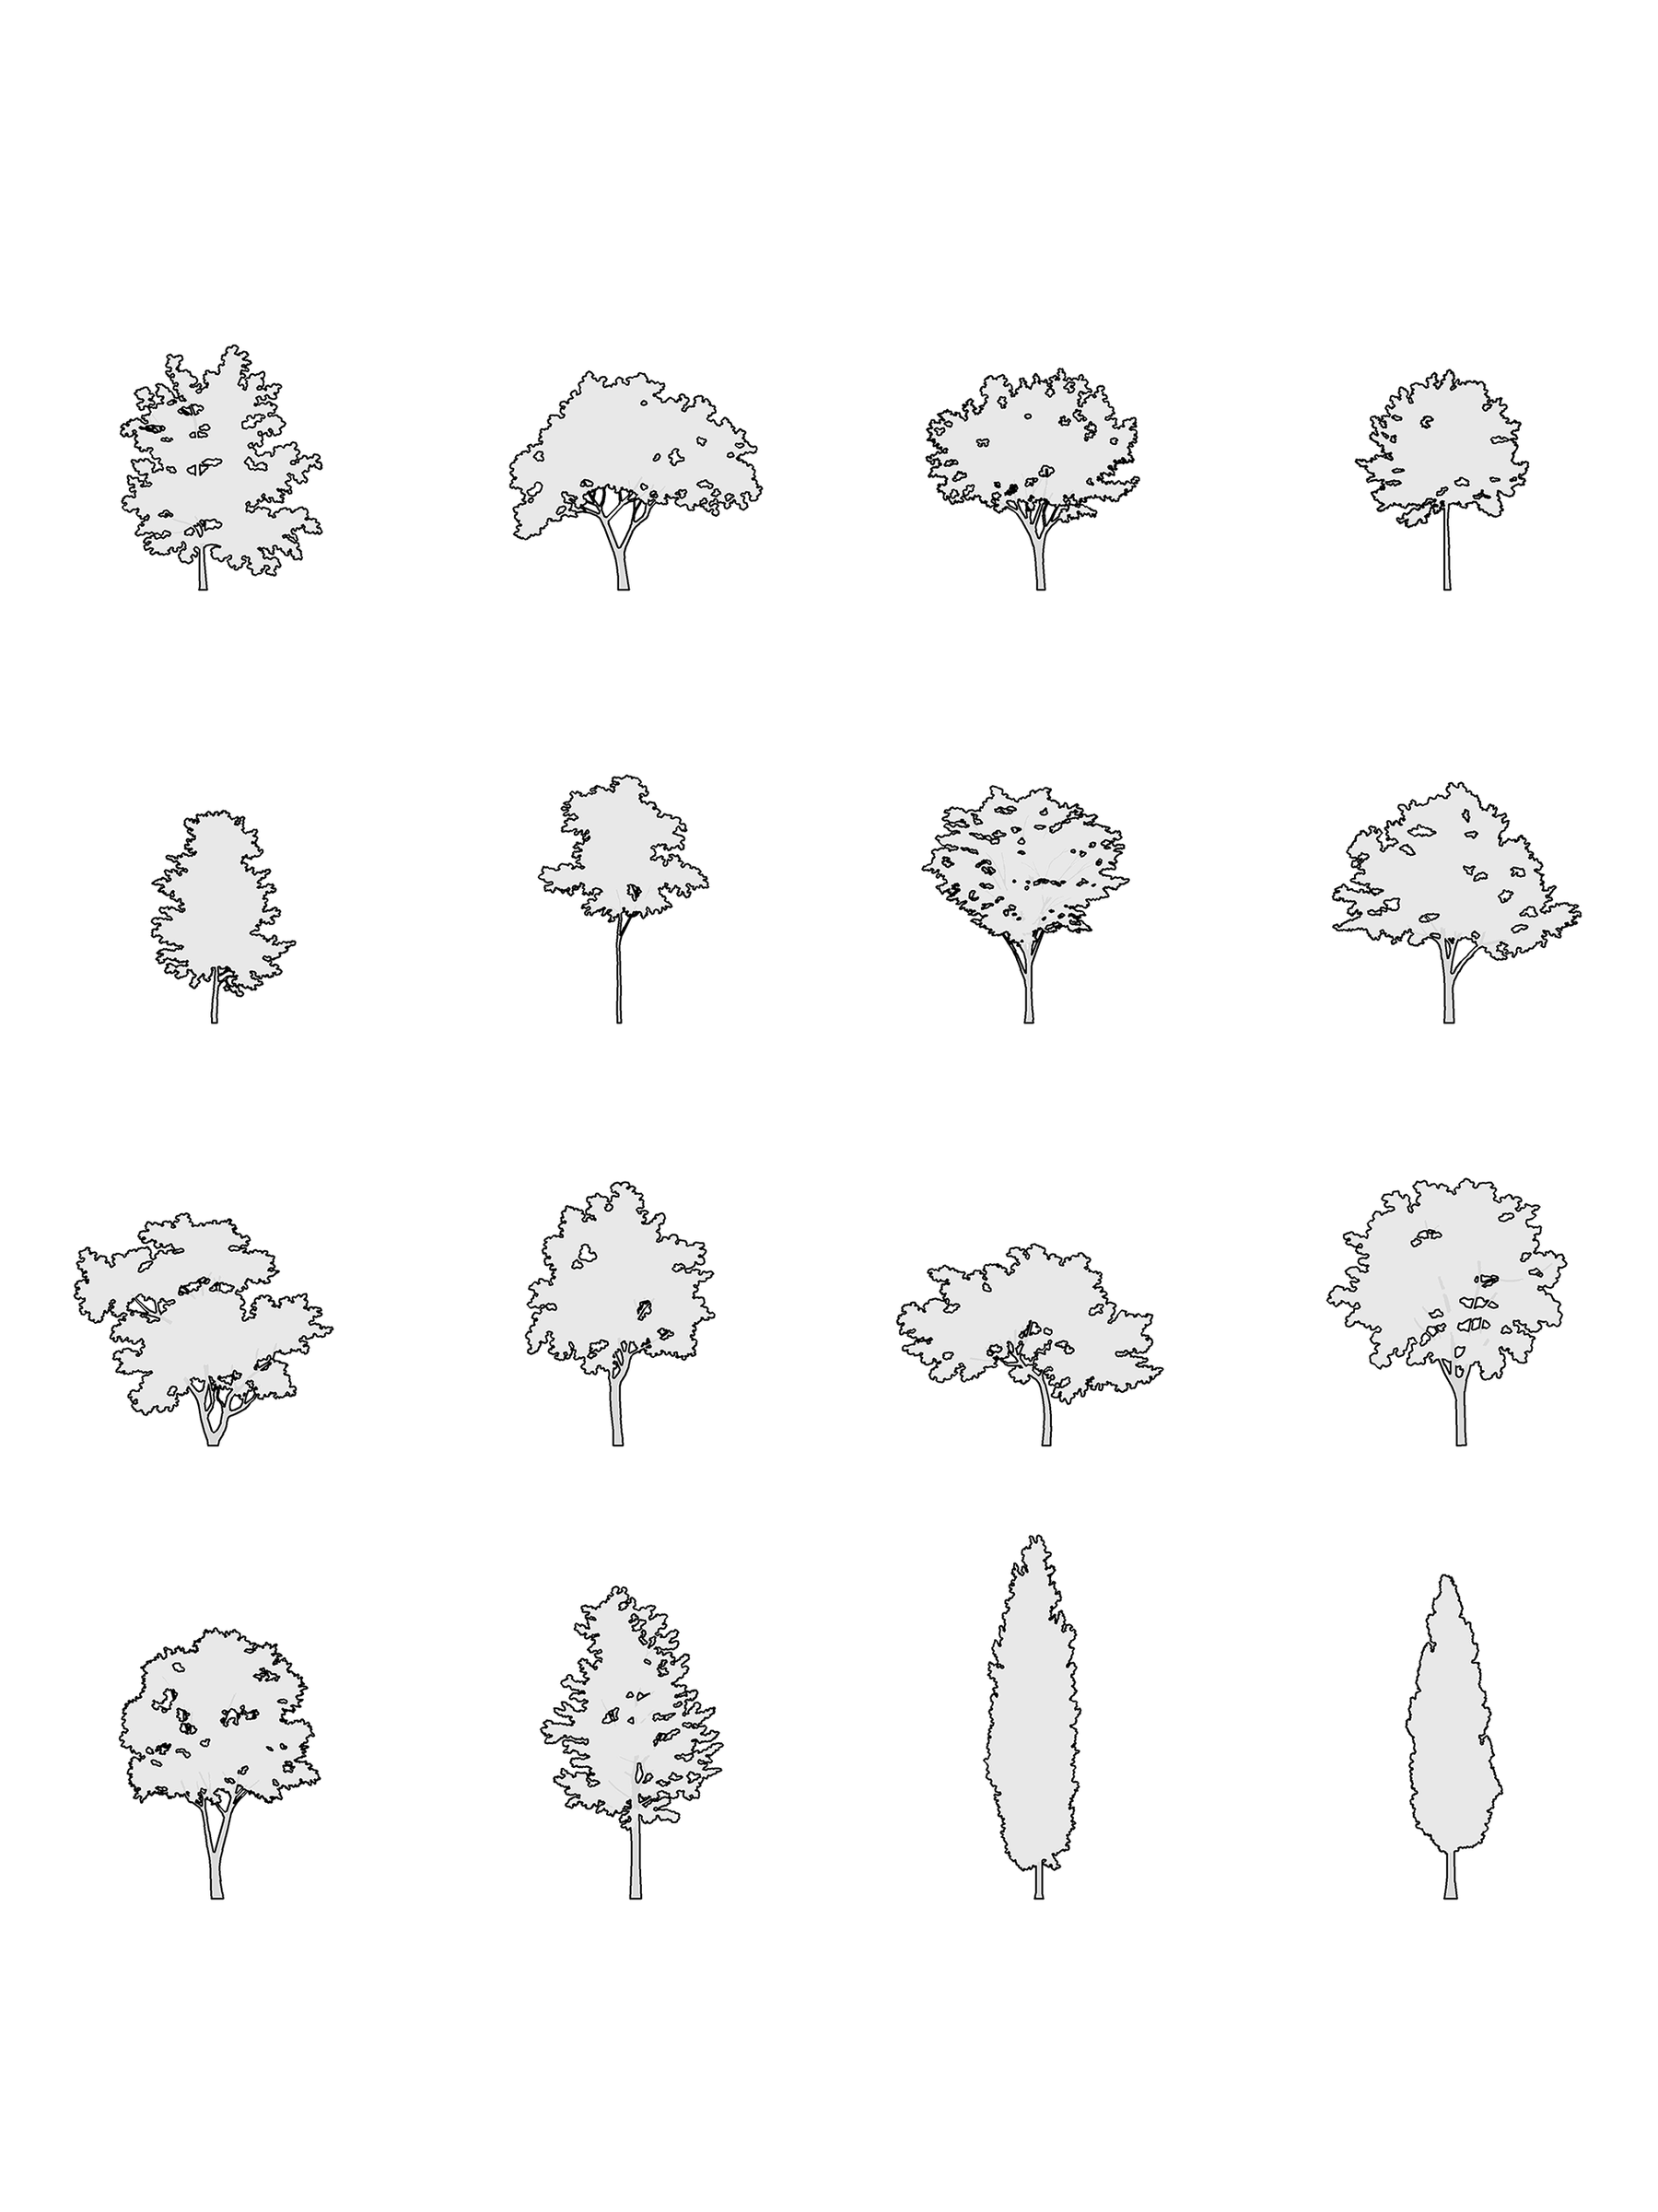 Small Tree Free Hand Sketch Outlines Stock Vector (Royalty Free) 233914186  | Shutterstock